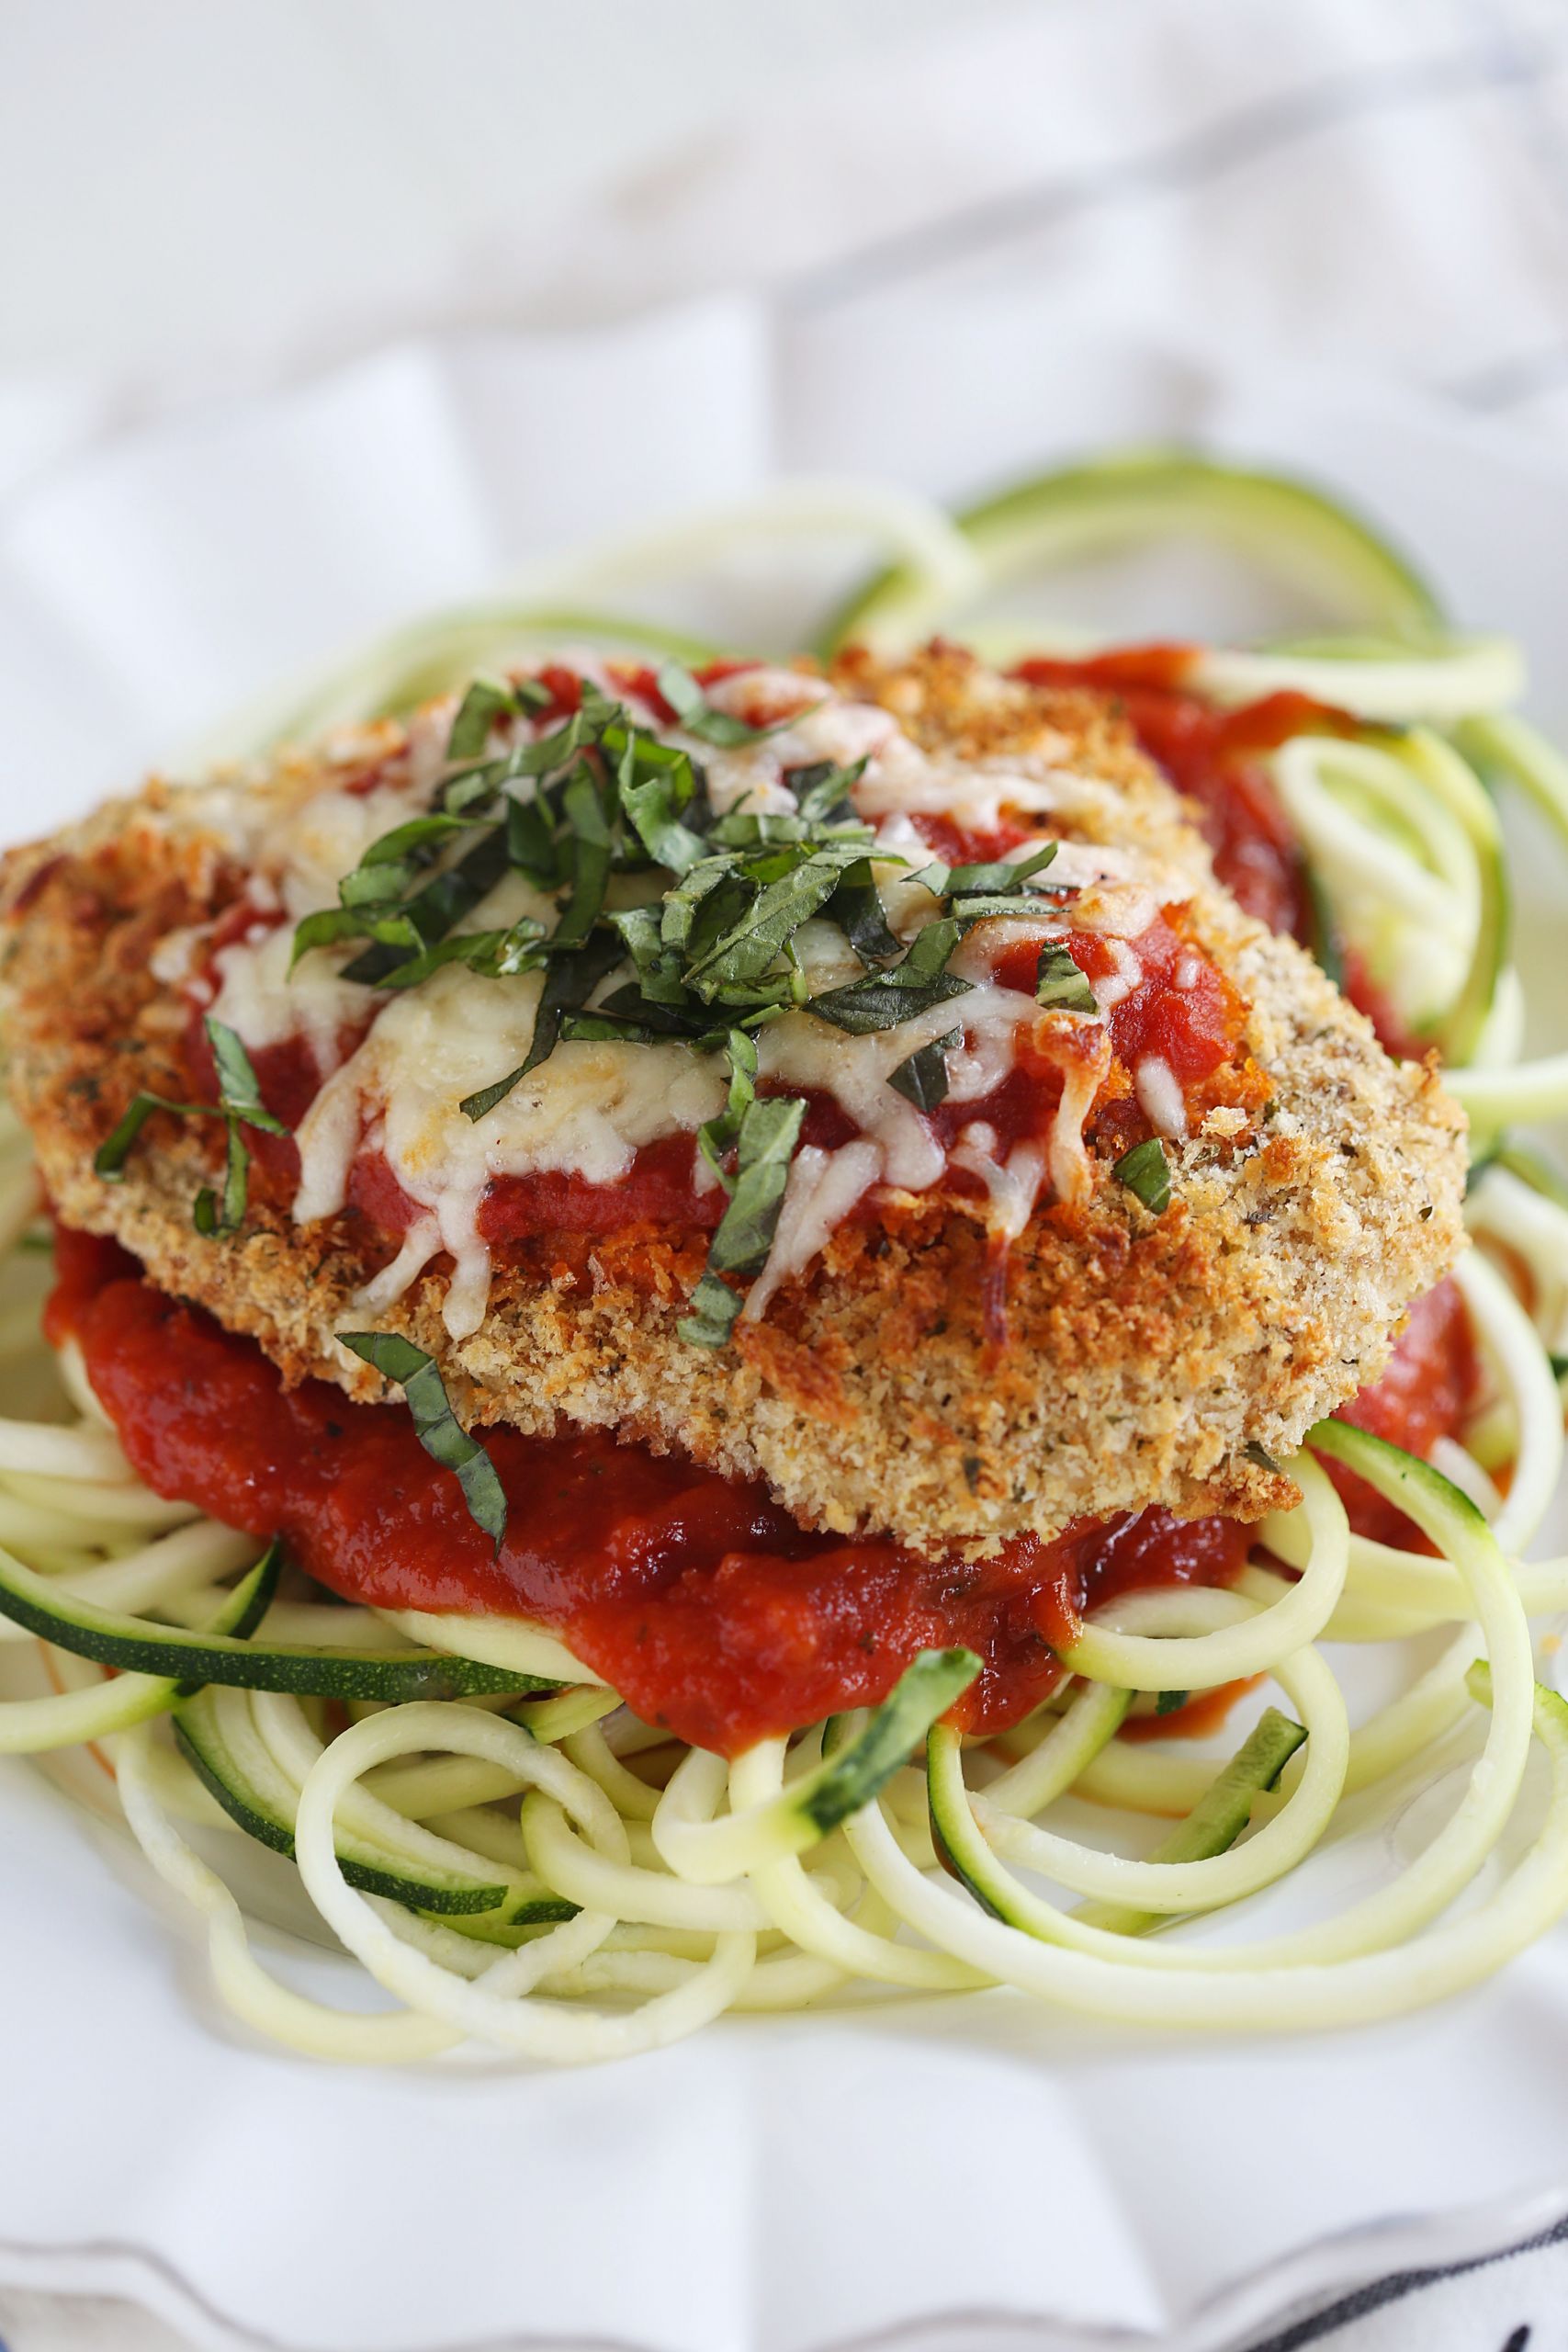 Parmesan Baked Chicken Awesome Baked Chicken Parmesan with Zucchini Noodles Eat